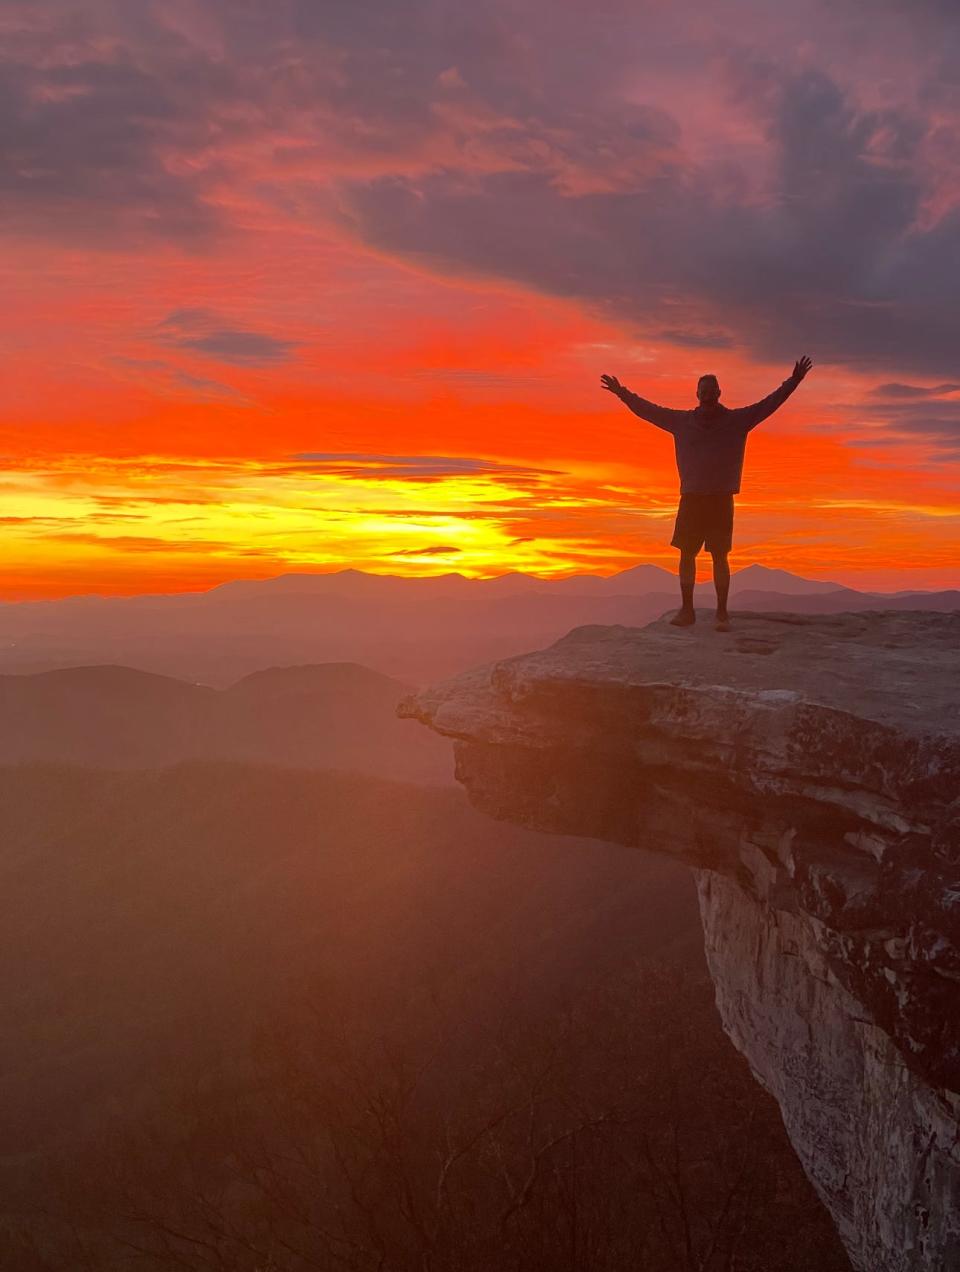 Sunrise is seen at McAfee Knob in Virginia.